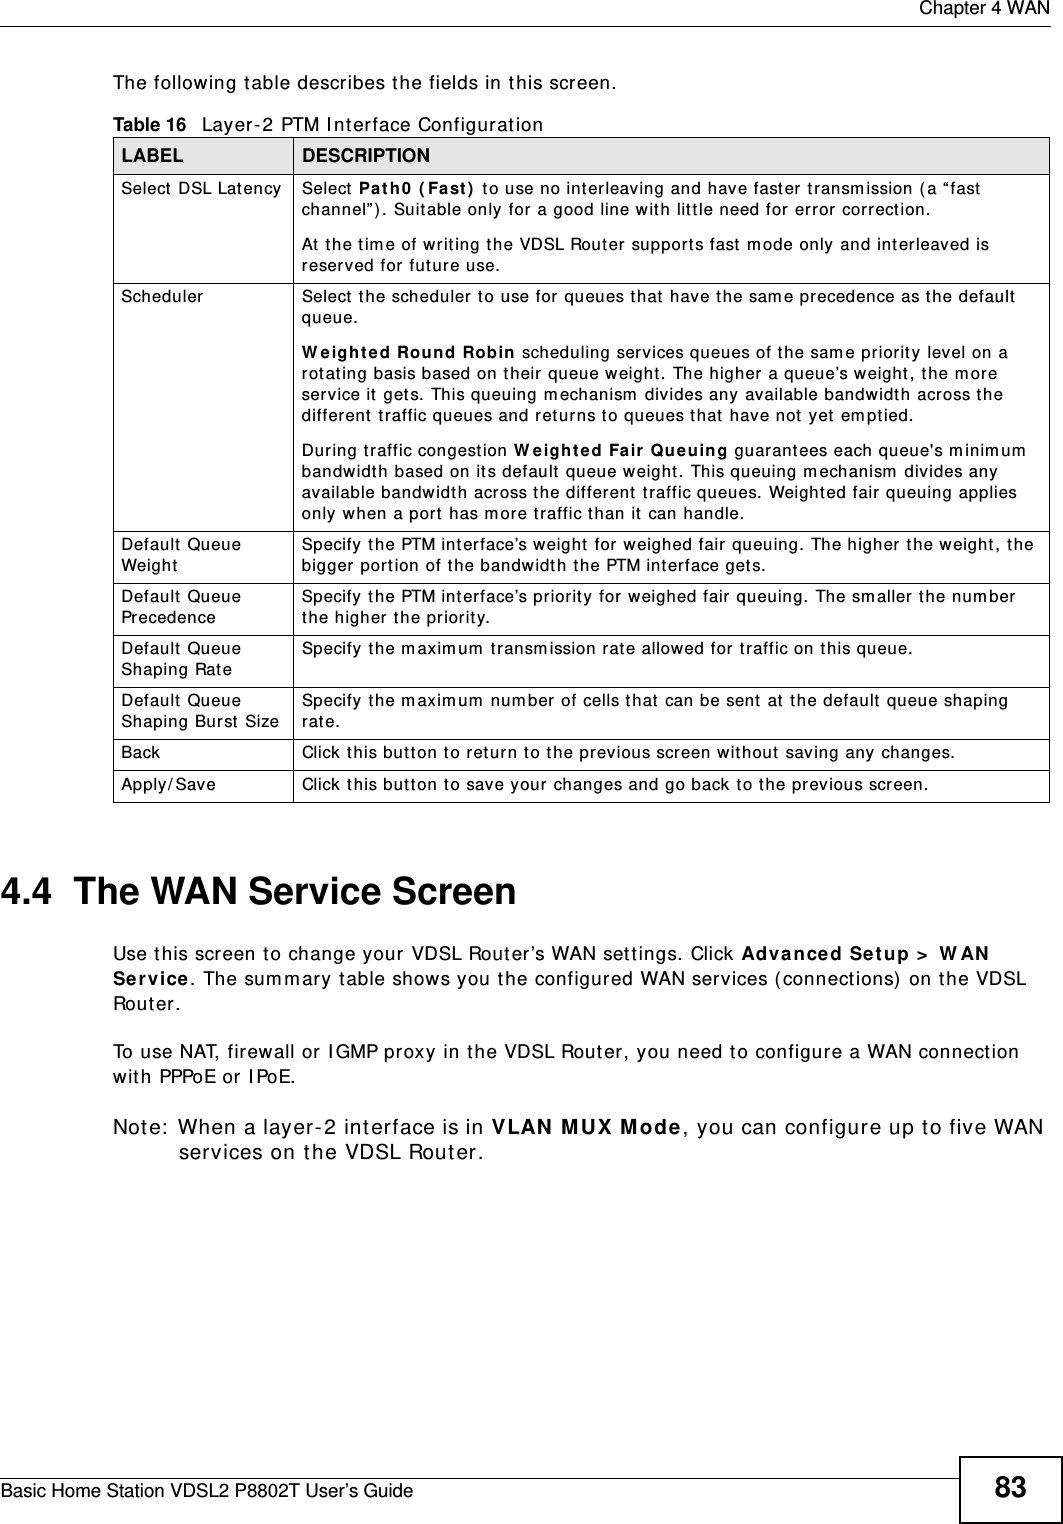  Chapter 4 WANBasic Home Station VDSL2 P8802T User’s Guide 83The following t able describes t he fields in this screen. 4.4  The WAN Service Screen Use t his screen t o change your VDSL Router’s WAN sett ings. Click Advance d Setup &gt;  W AN  Se rvice. The sum m ary table shows you the configured WAN services (connect ions)  on t he VDSL Rou t er .  To use NAT, firewall or I GMP proxy in the VDSL Router, you need t o configure a WAN connect ion with PPPoE or I PoE.Note:  When a layer- 2 interface is in VLAN MUX Mode, you can configure up t o five WAN services on the VDSL Rout er.Table 16   Layer-2 PTM I nt erface Configurat ionLABEL DESCRIPTIONSelect  DSL Lat ency Select  Pat h0  ( Fa st )  to use no int er leaving and have fast er t ransm ission ( a “fast  channel” ) . Suit able only for a good line wit h lit tle need for er ror correct ion.At  t he tim e of writ ing t he VDSL Rout er supports fast  m ode only and interleaved is reserved for fut ur e use. Scheduler Select  t he scheduler t o use for queues that  have t he sam e precedence as the default  queue.W eight ed Rou nd Robin scheduling services queues of t he sam e priority level on a rot at ing basis based on their queue weight. The higher a queue’s weight , the m ore service it  gets.  This queuing m echanism  divides any available bandwidth across t he different t raffic queues and ret urns to queues that  have not  yet  em ptied.During traffic congest ion W eighte d Fa ir  Queu ing guarant ees each queue&apos;s m inim um  bandwidth based on it s default  queue weight. This queuing m echanism  divides any available bandwidth across the different t raffic queues. Weighted fair queuing applies only when a port has m ore t raffic than it  can handle. Default  Queue Weig htSpecify t he PTM int erface’s weight  for  weighed fair queuing. The higher t he weight , t he bigger port ion of the bandwidth the PTM interface gets.Default  Queue PrecedenceSpecify t he PTM int erface’s prior ity for weighed fair queuing. The sm aller the num ber t he higher the priorit y.Default  Queue Shaping Rat eSpecify the m axim um  transm ission rat e allowed for traffic on this queue. Default  Queue Shaping Burst  SizeSpecify the m aximum  num ber  of cells that  can be sent  at  the default queue shaping rate. Back Click this but ton t o ret urn t o t he previous screen wit hout saving any changes.Apply/ Save Click t his but t on to sav e your  changes and go back to the previous screen.